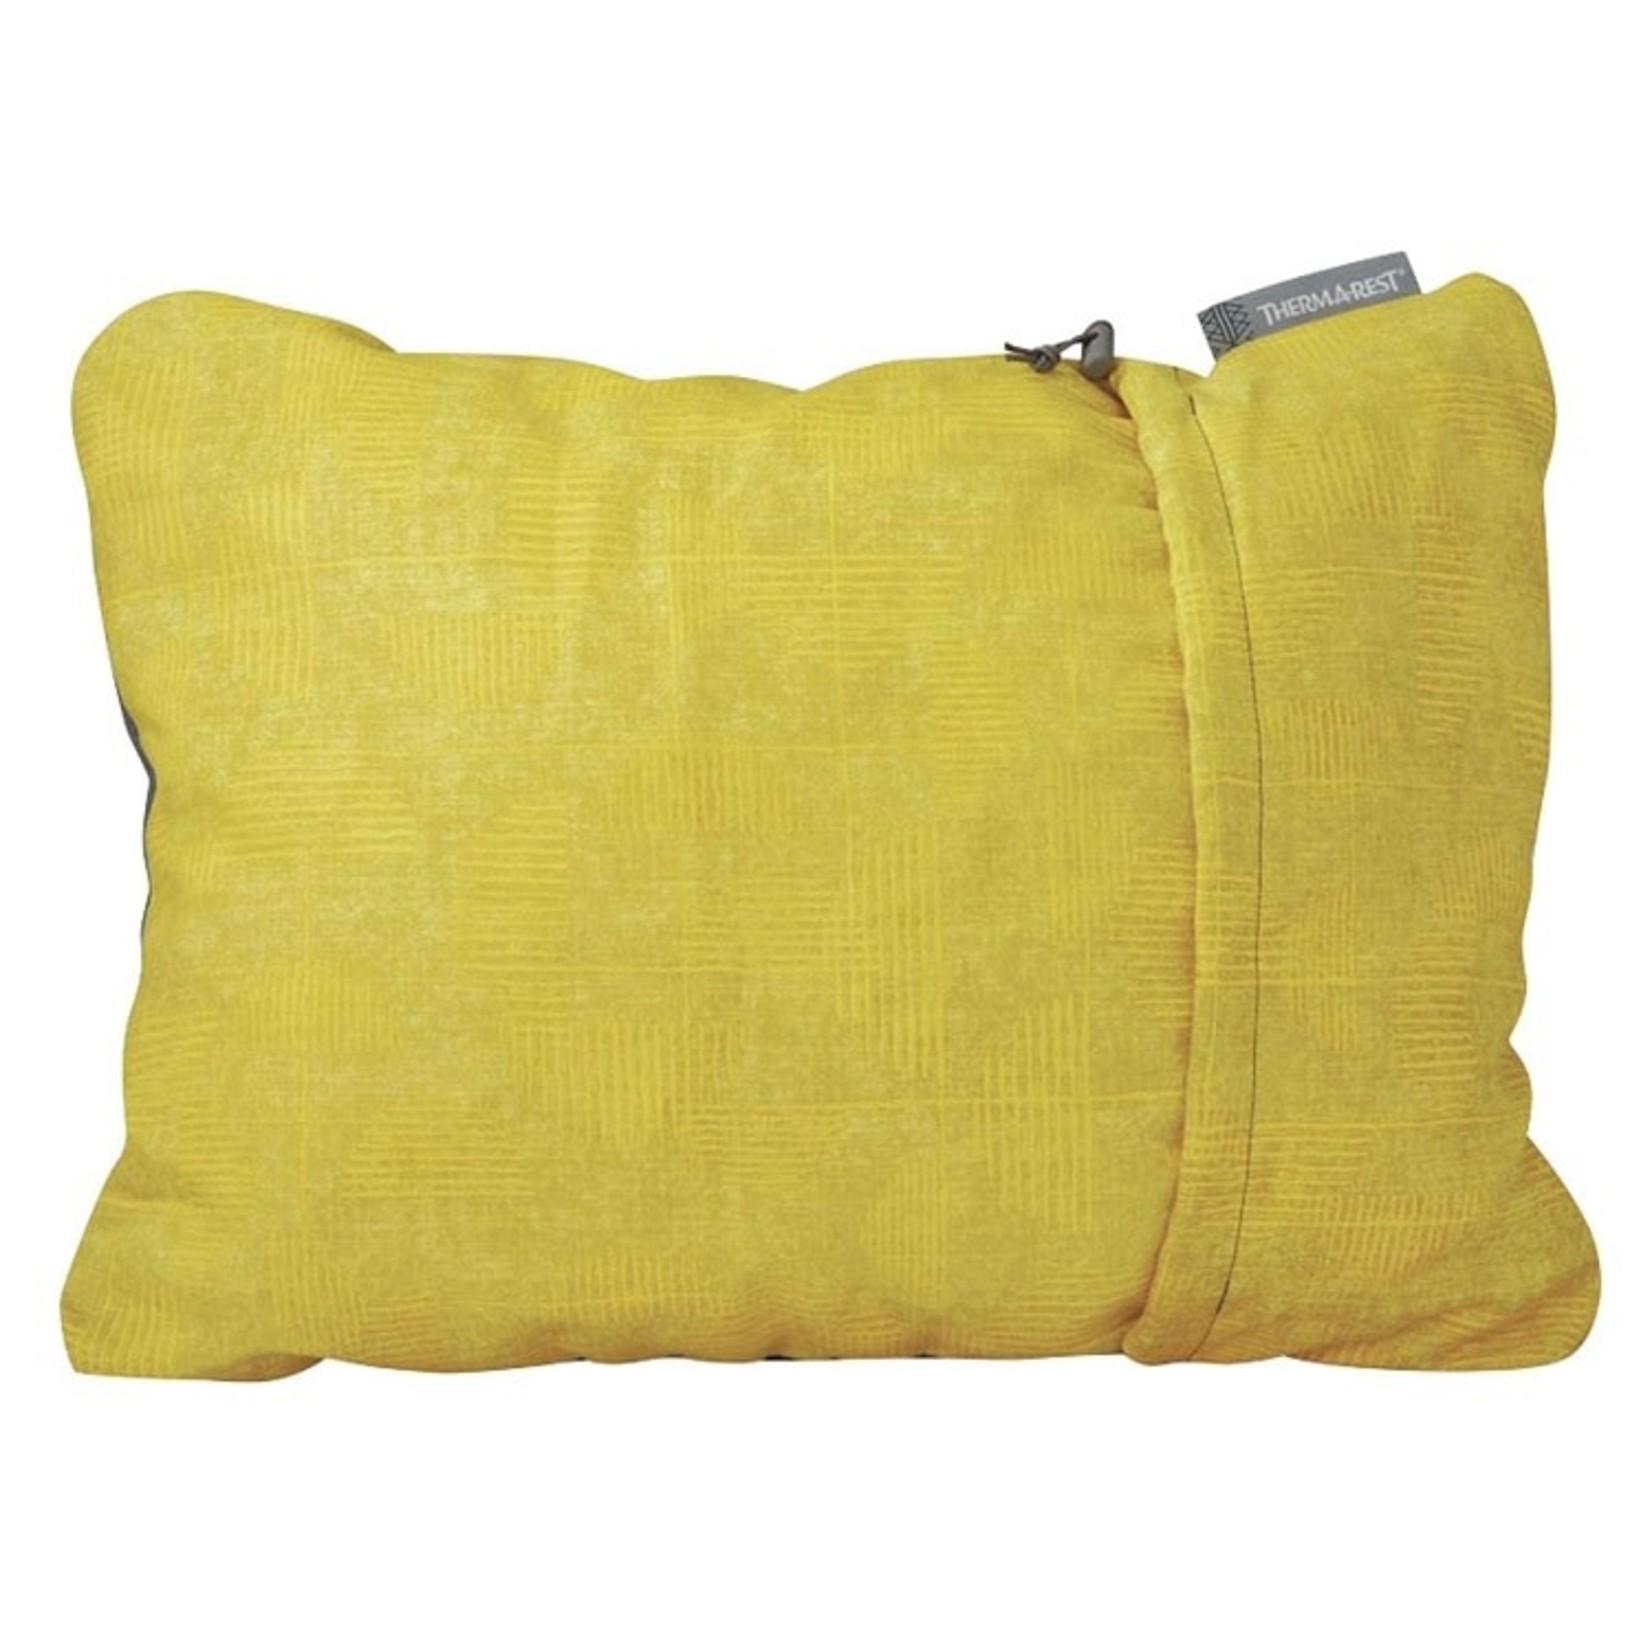 Thermarest PILLOW-COMP. LARGE YELLOW PRINT